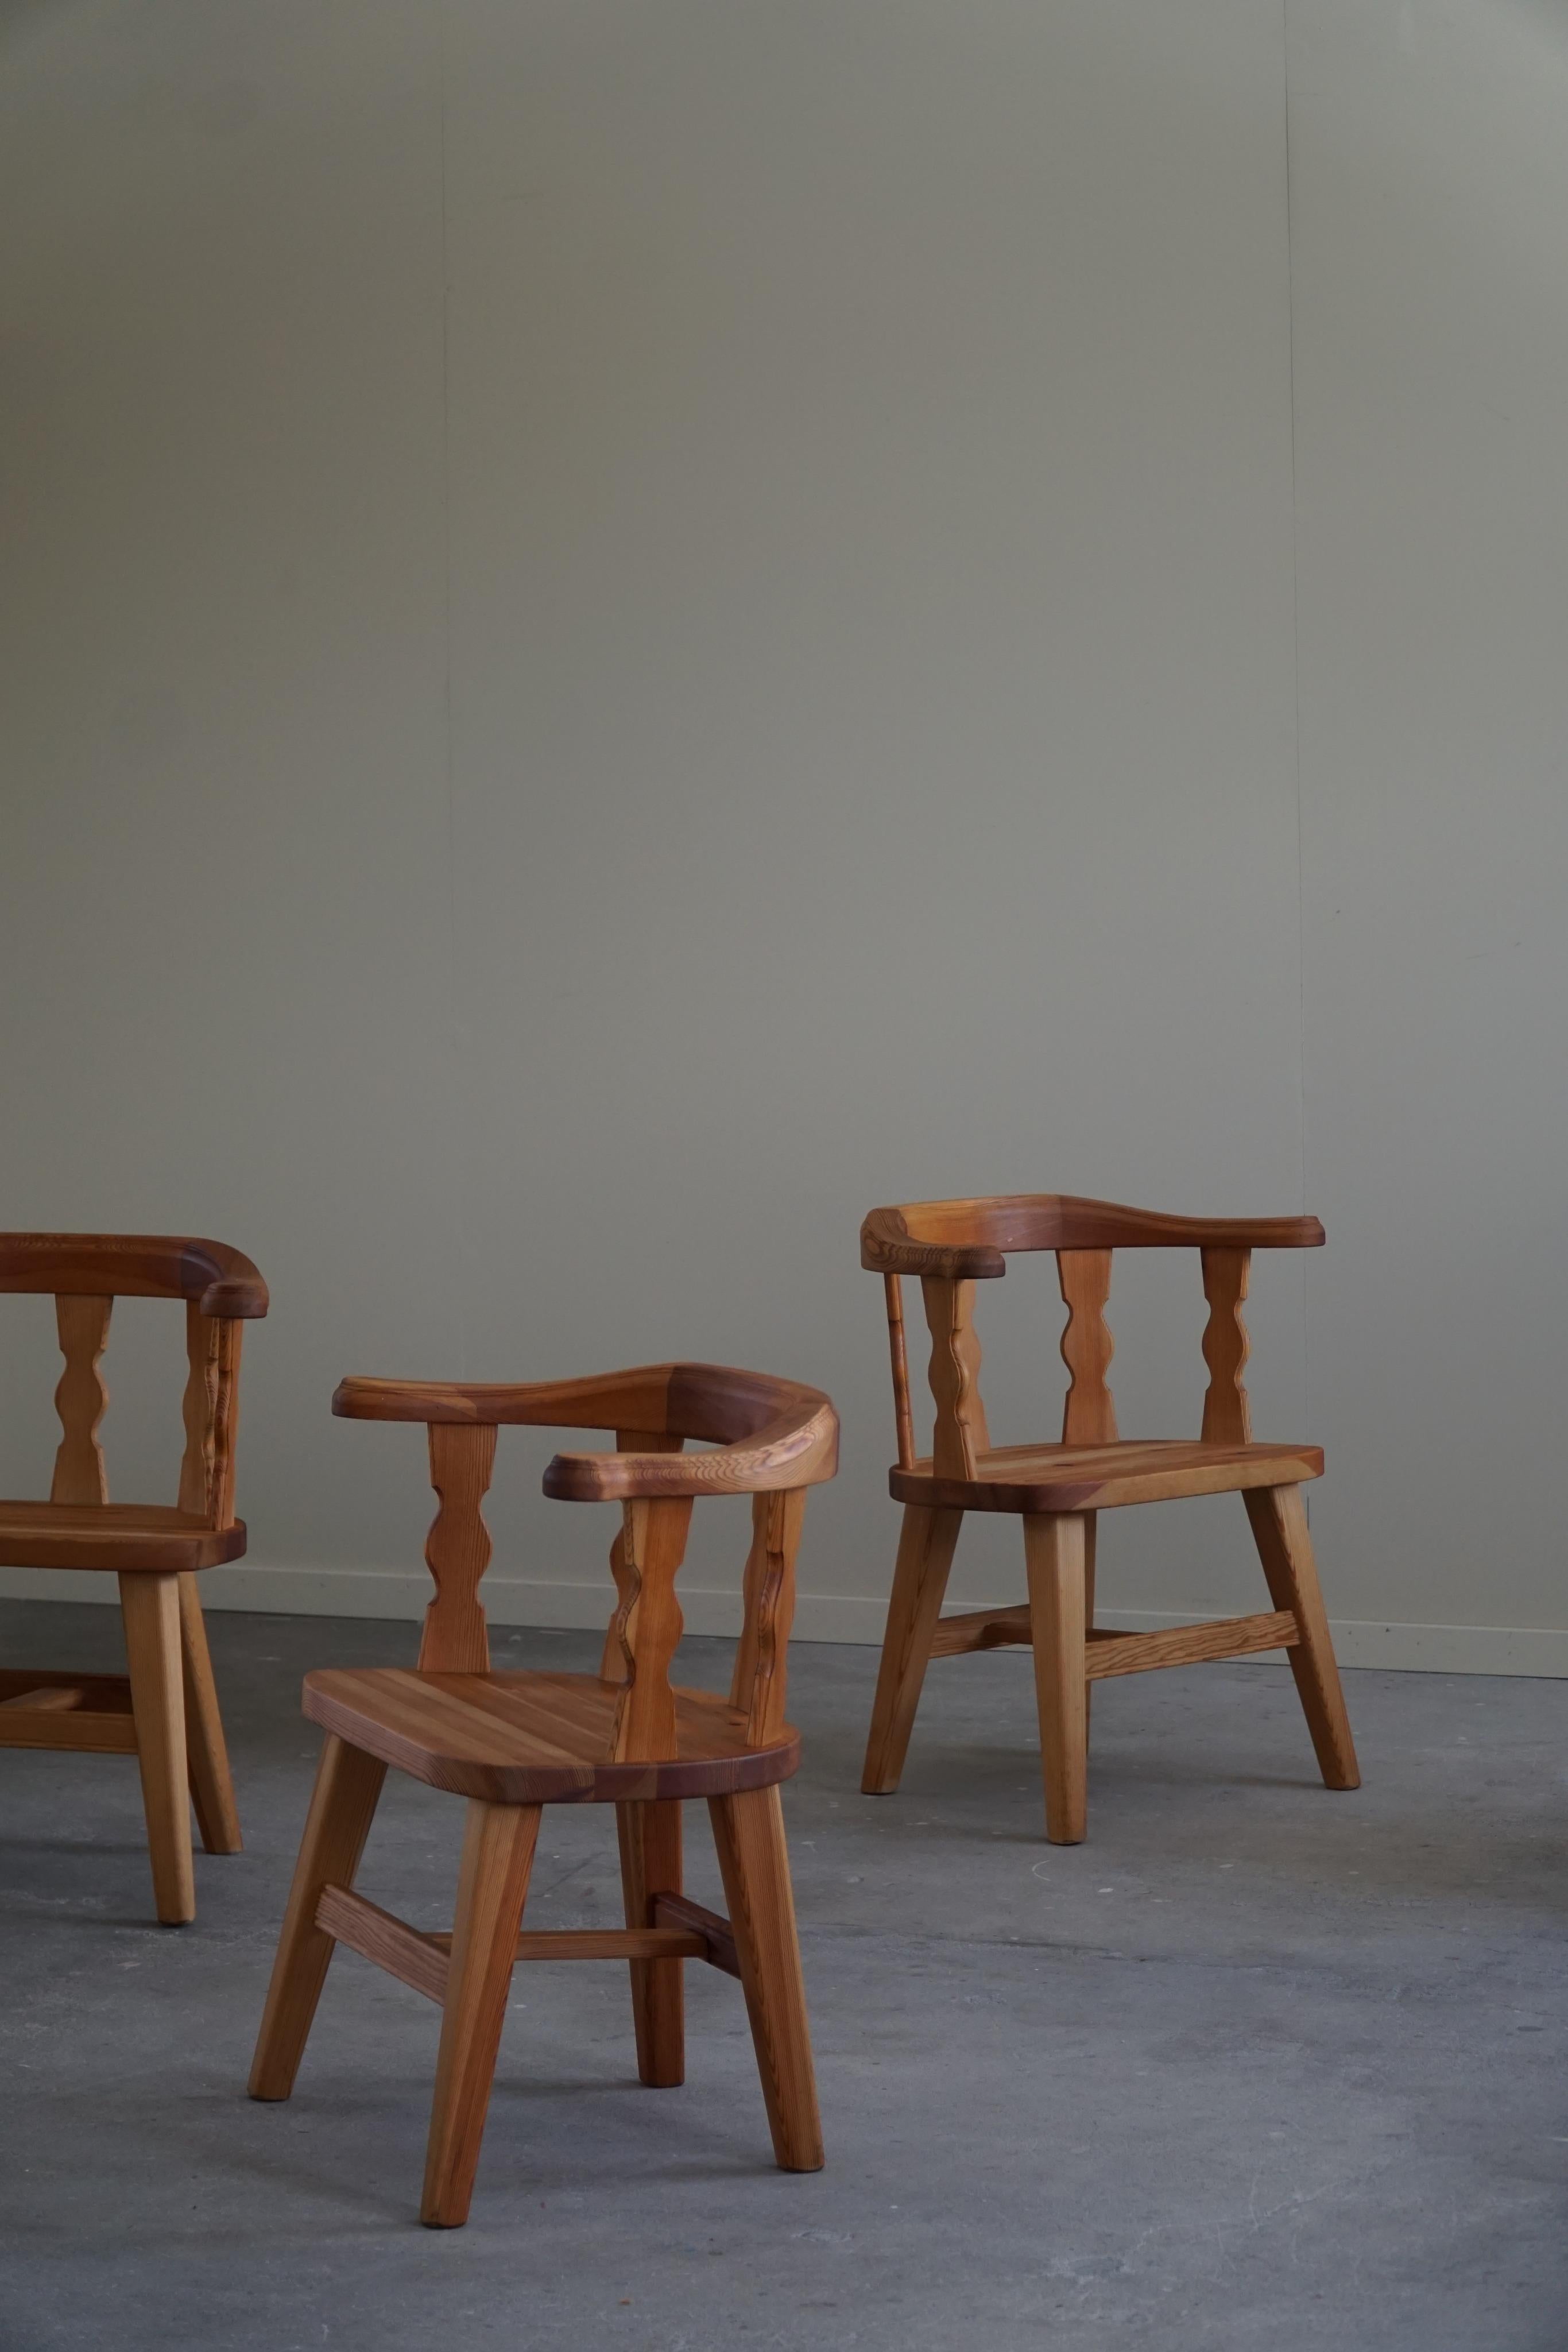 A set of 4 charming brutalist armchairs in solid pine. Made in Norway by Krogenæs in the 1950-1960s. 

These sculptural dining chairs have a really strong impression that pairs well with many types of interior styles. A Modern, Scandinavian, Classic